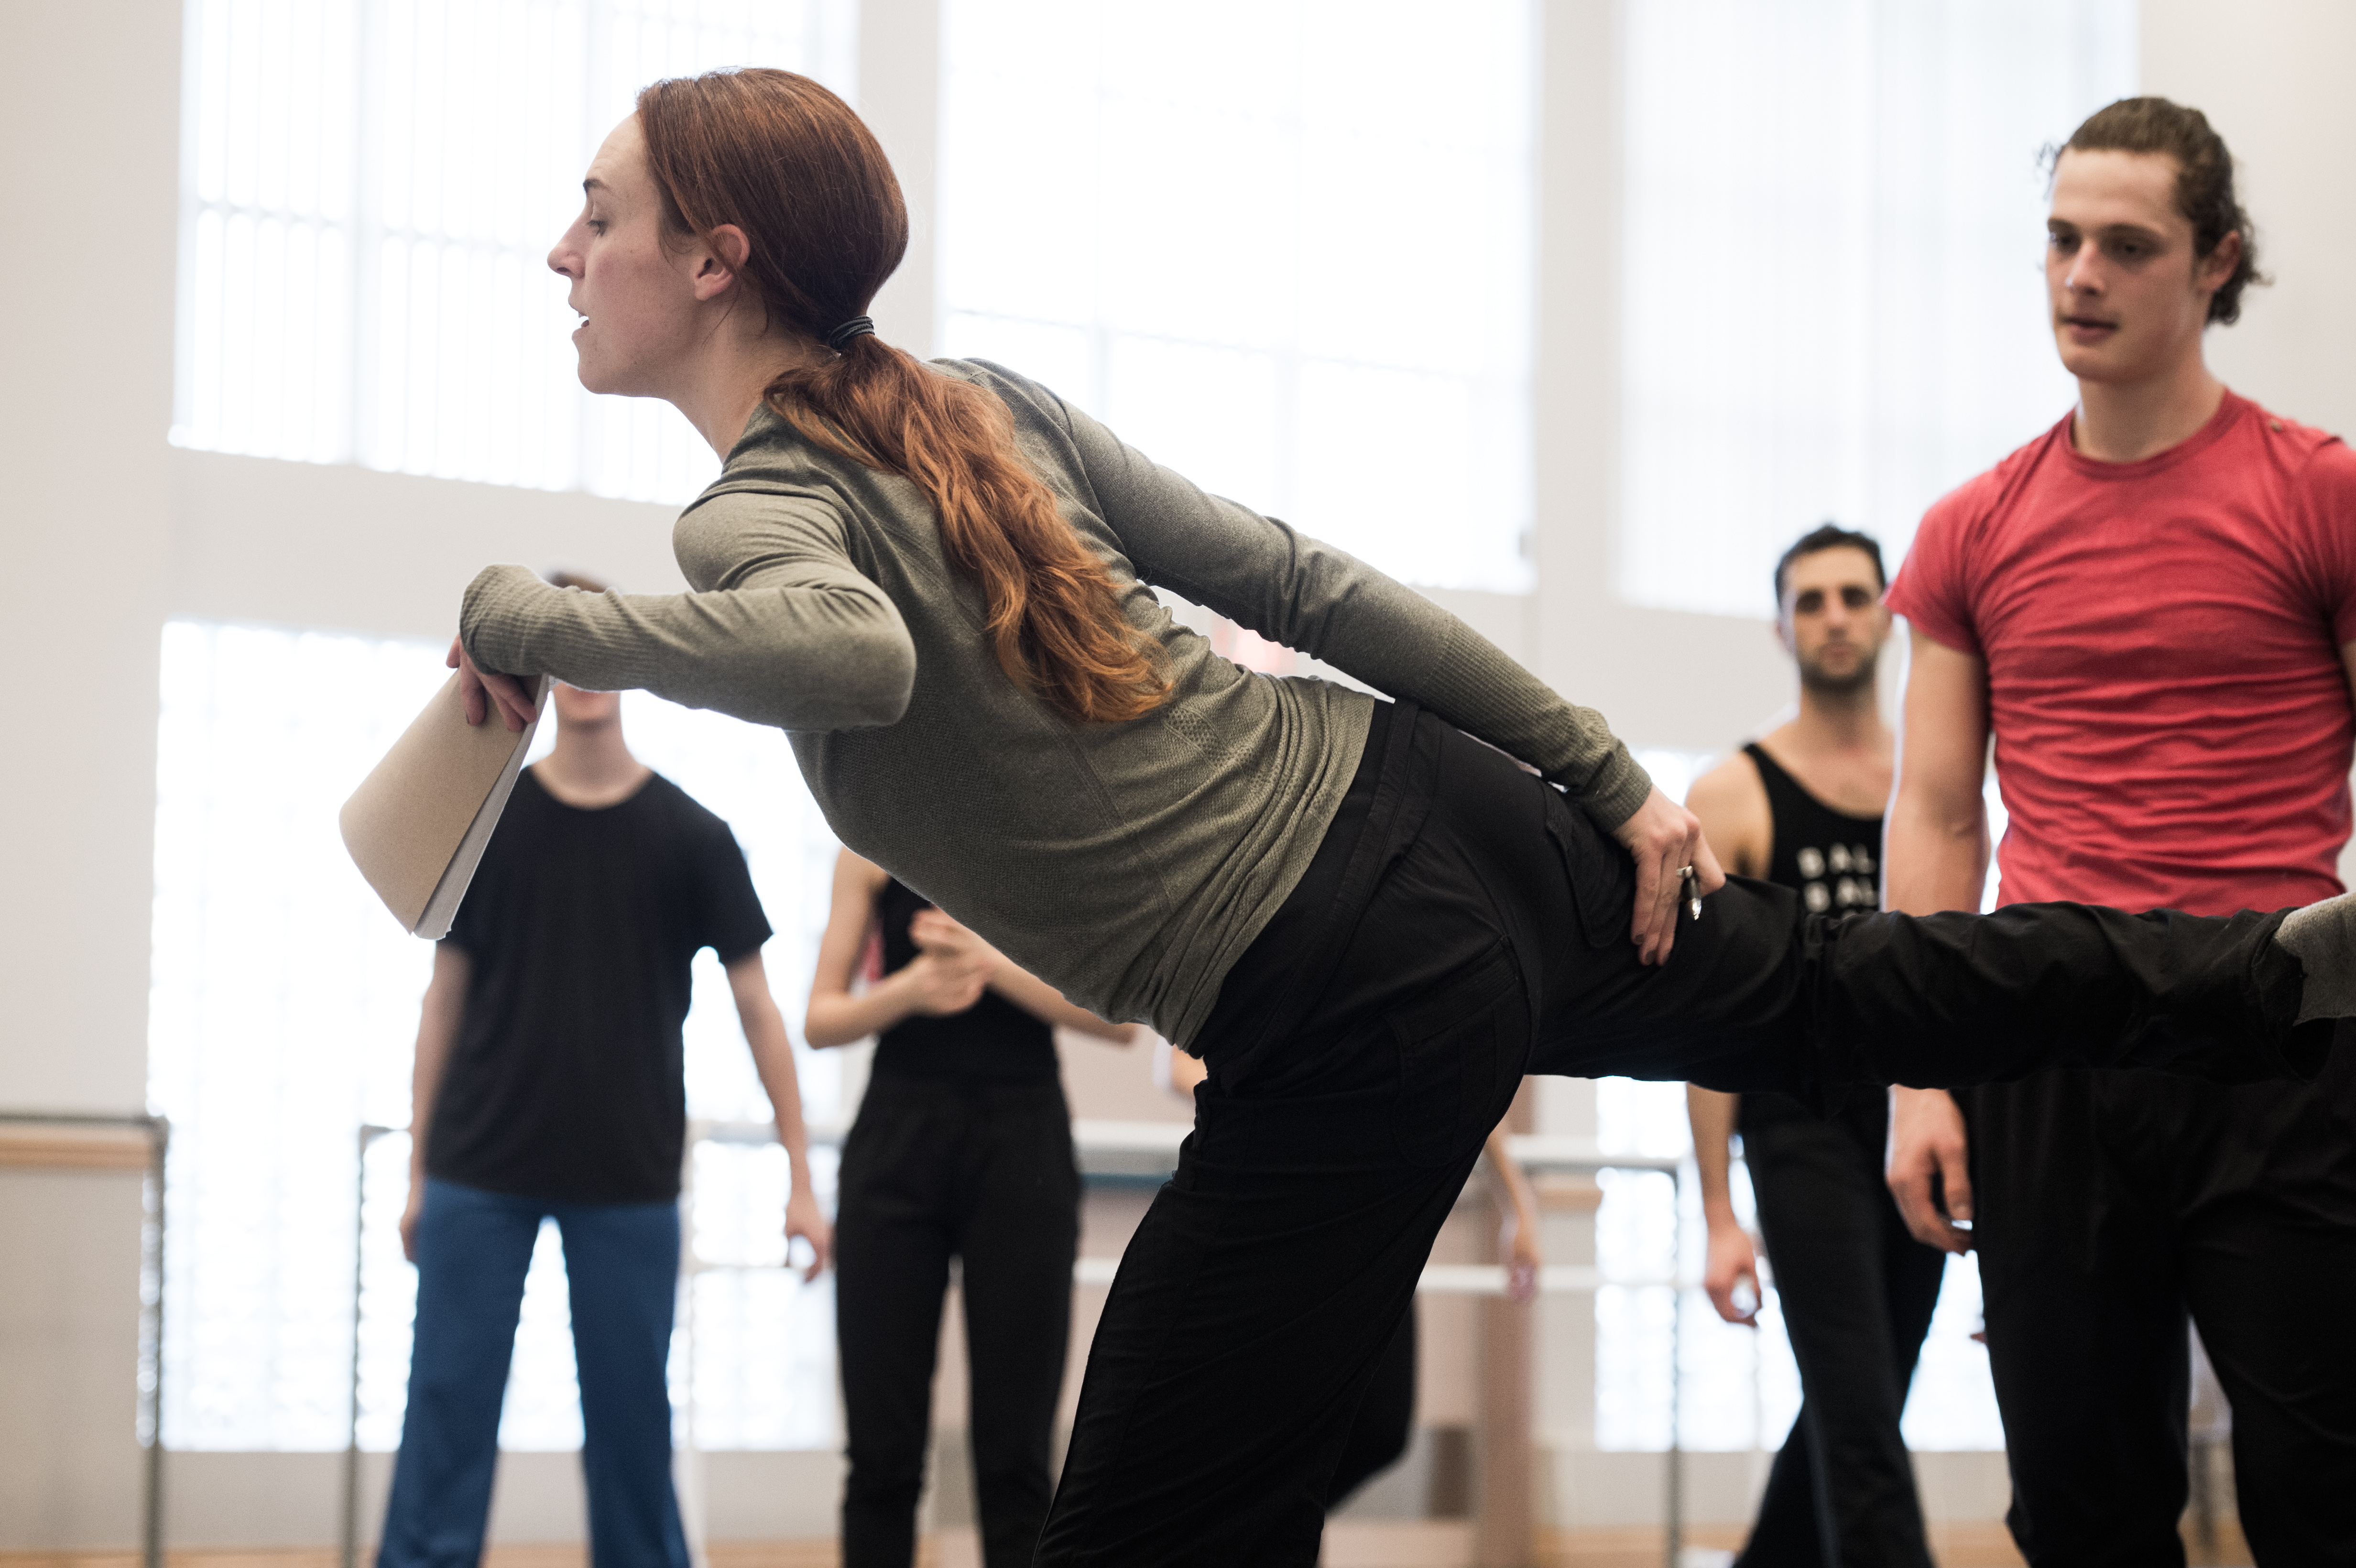 Kimberley de Jong (Compagnie Marie Chouinard) spent the first week of 2016 with the AUDC dancers setting Marie Chouinard's 'bODY_rEMIX/les_vARIATIONS_gOLDBERG'. Photos: David Cooper